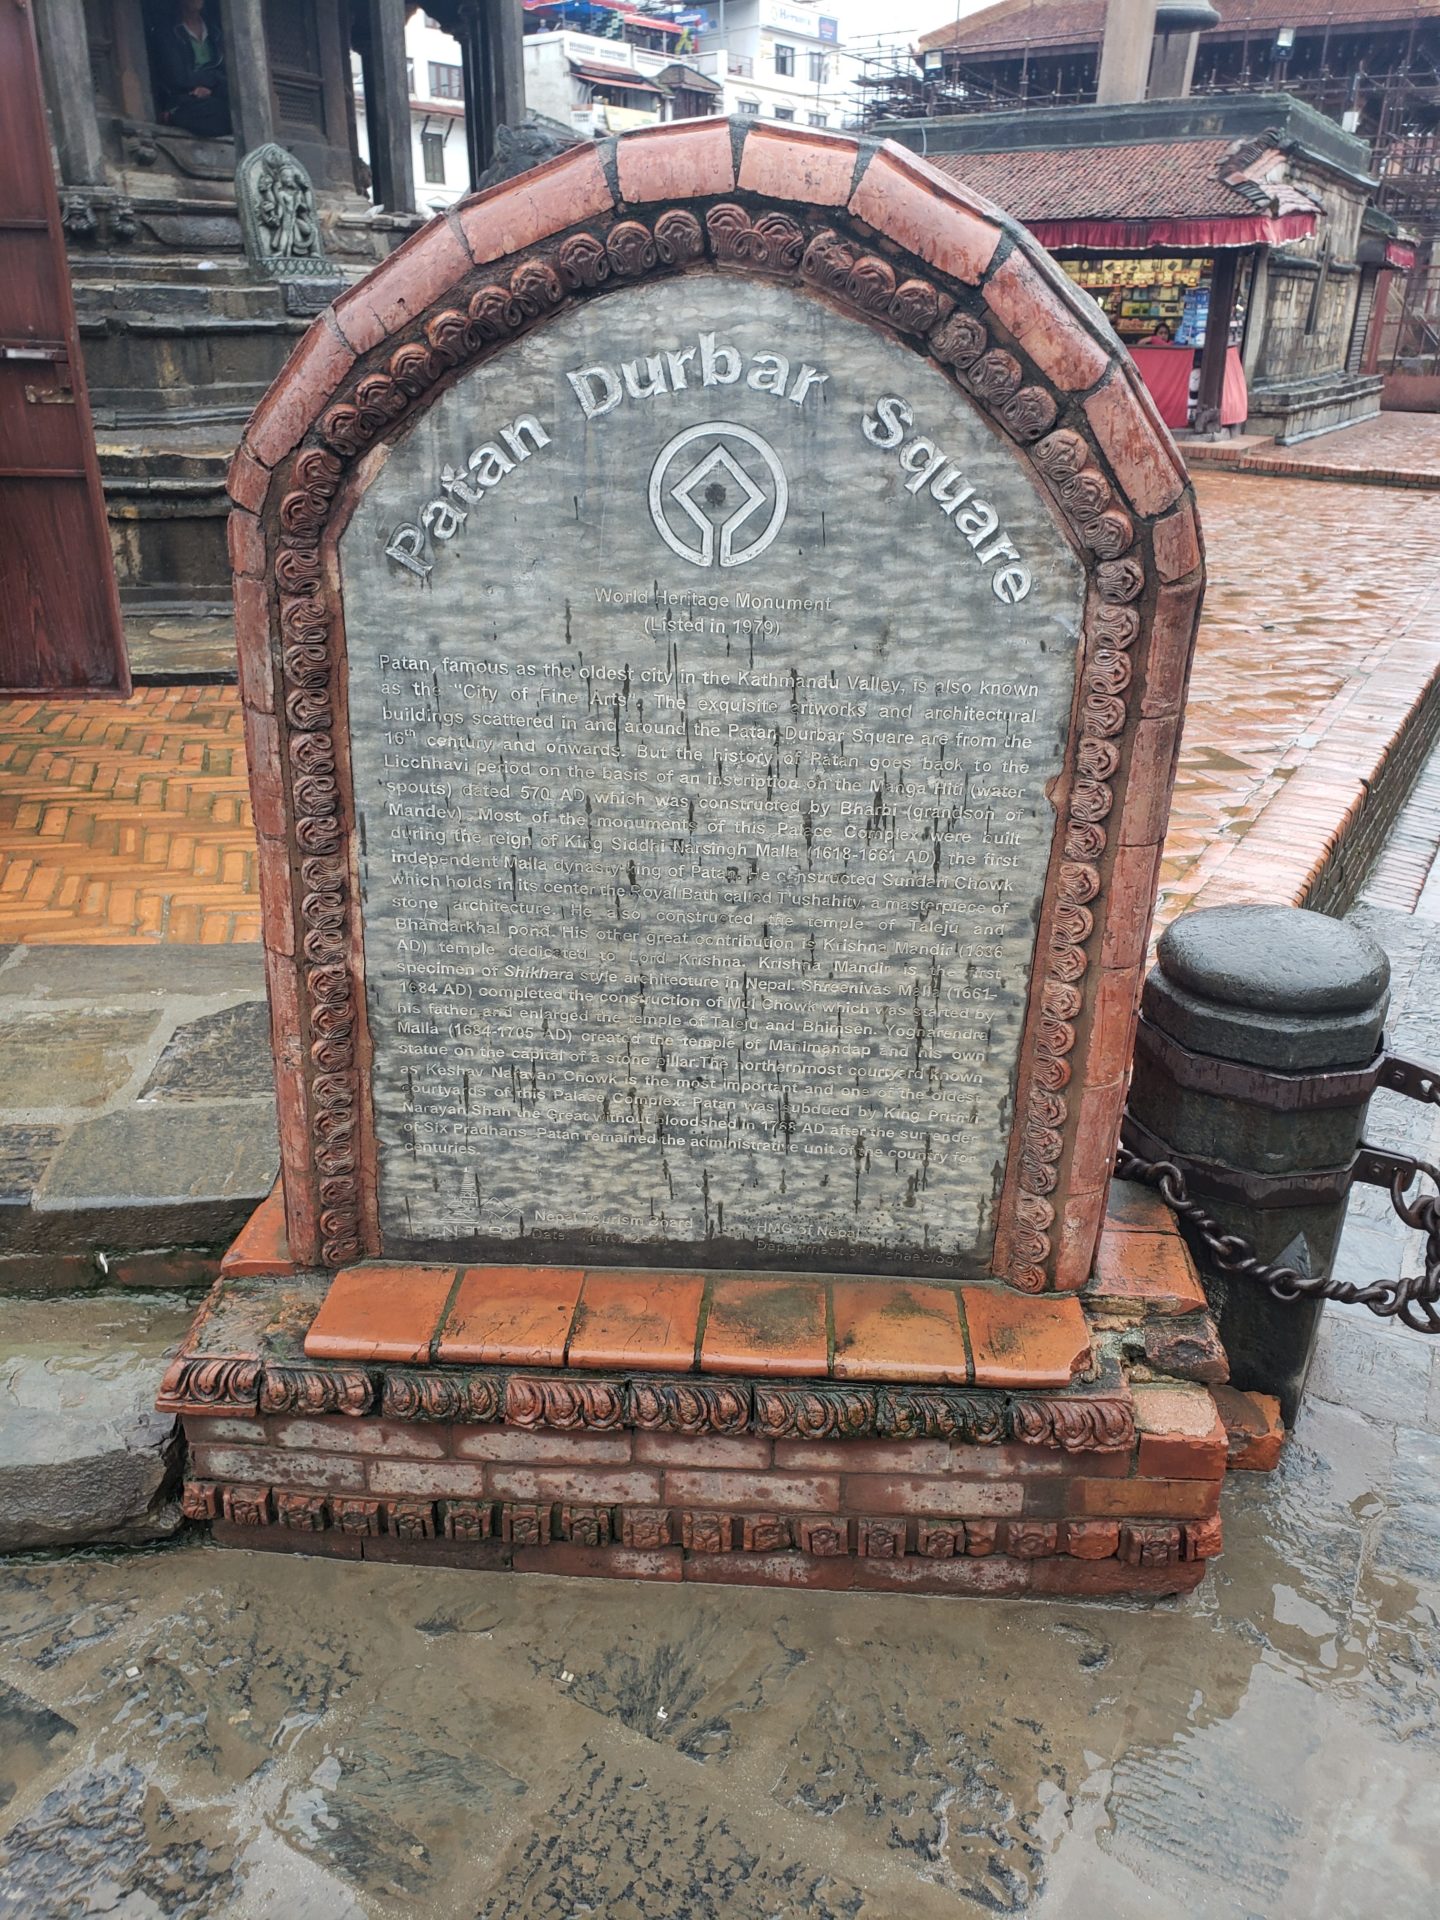 a stone monument with text on it